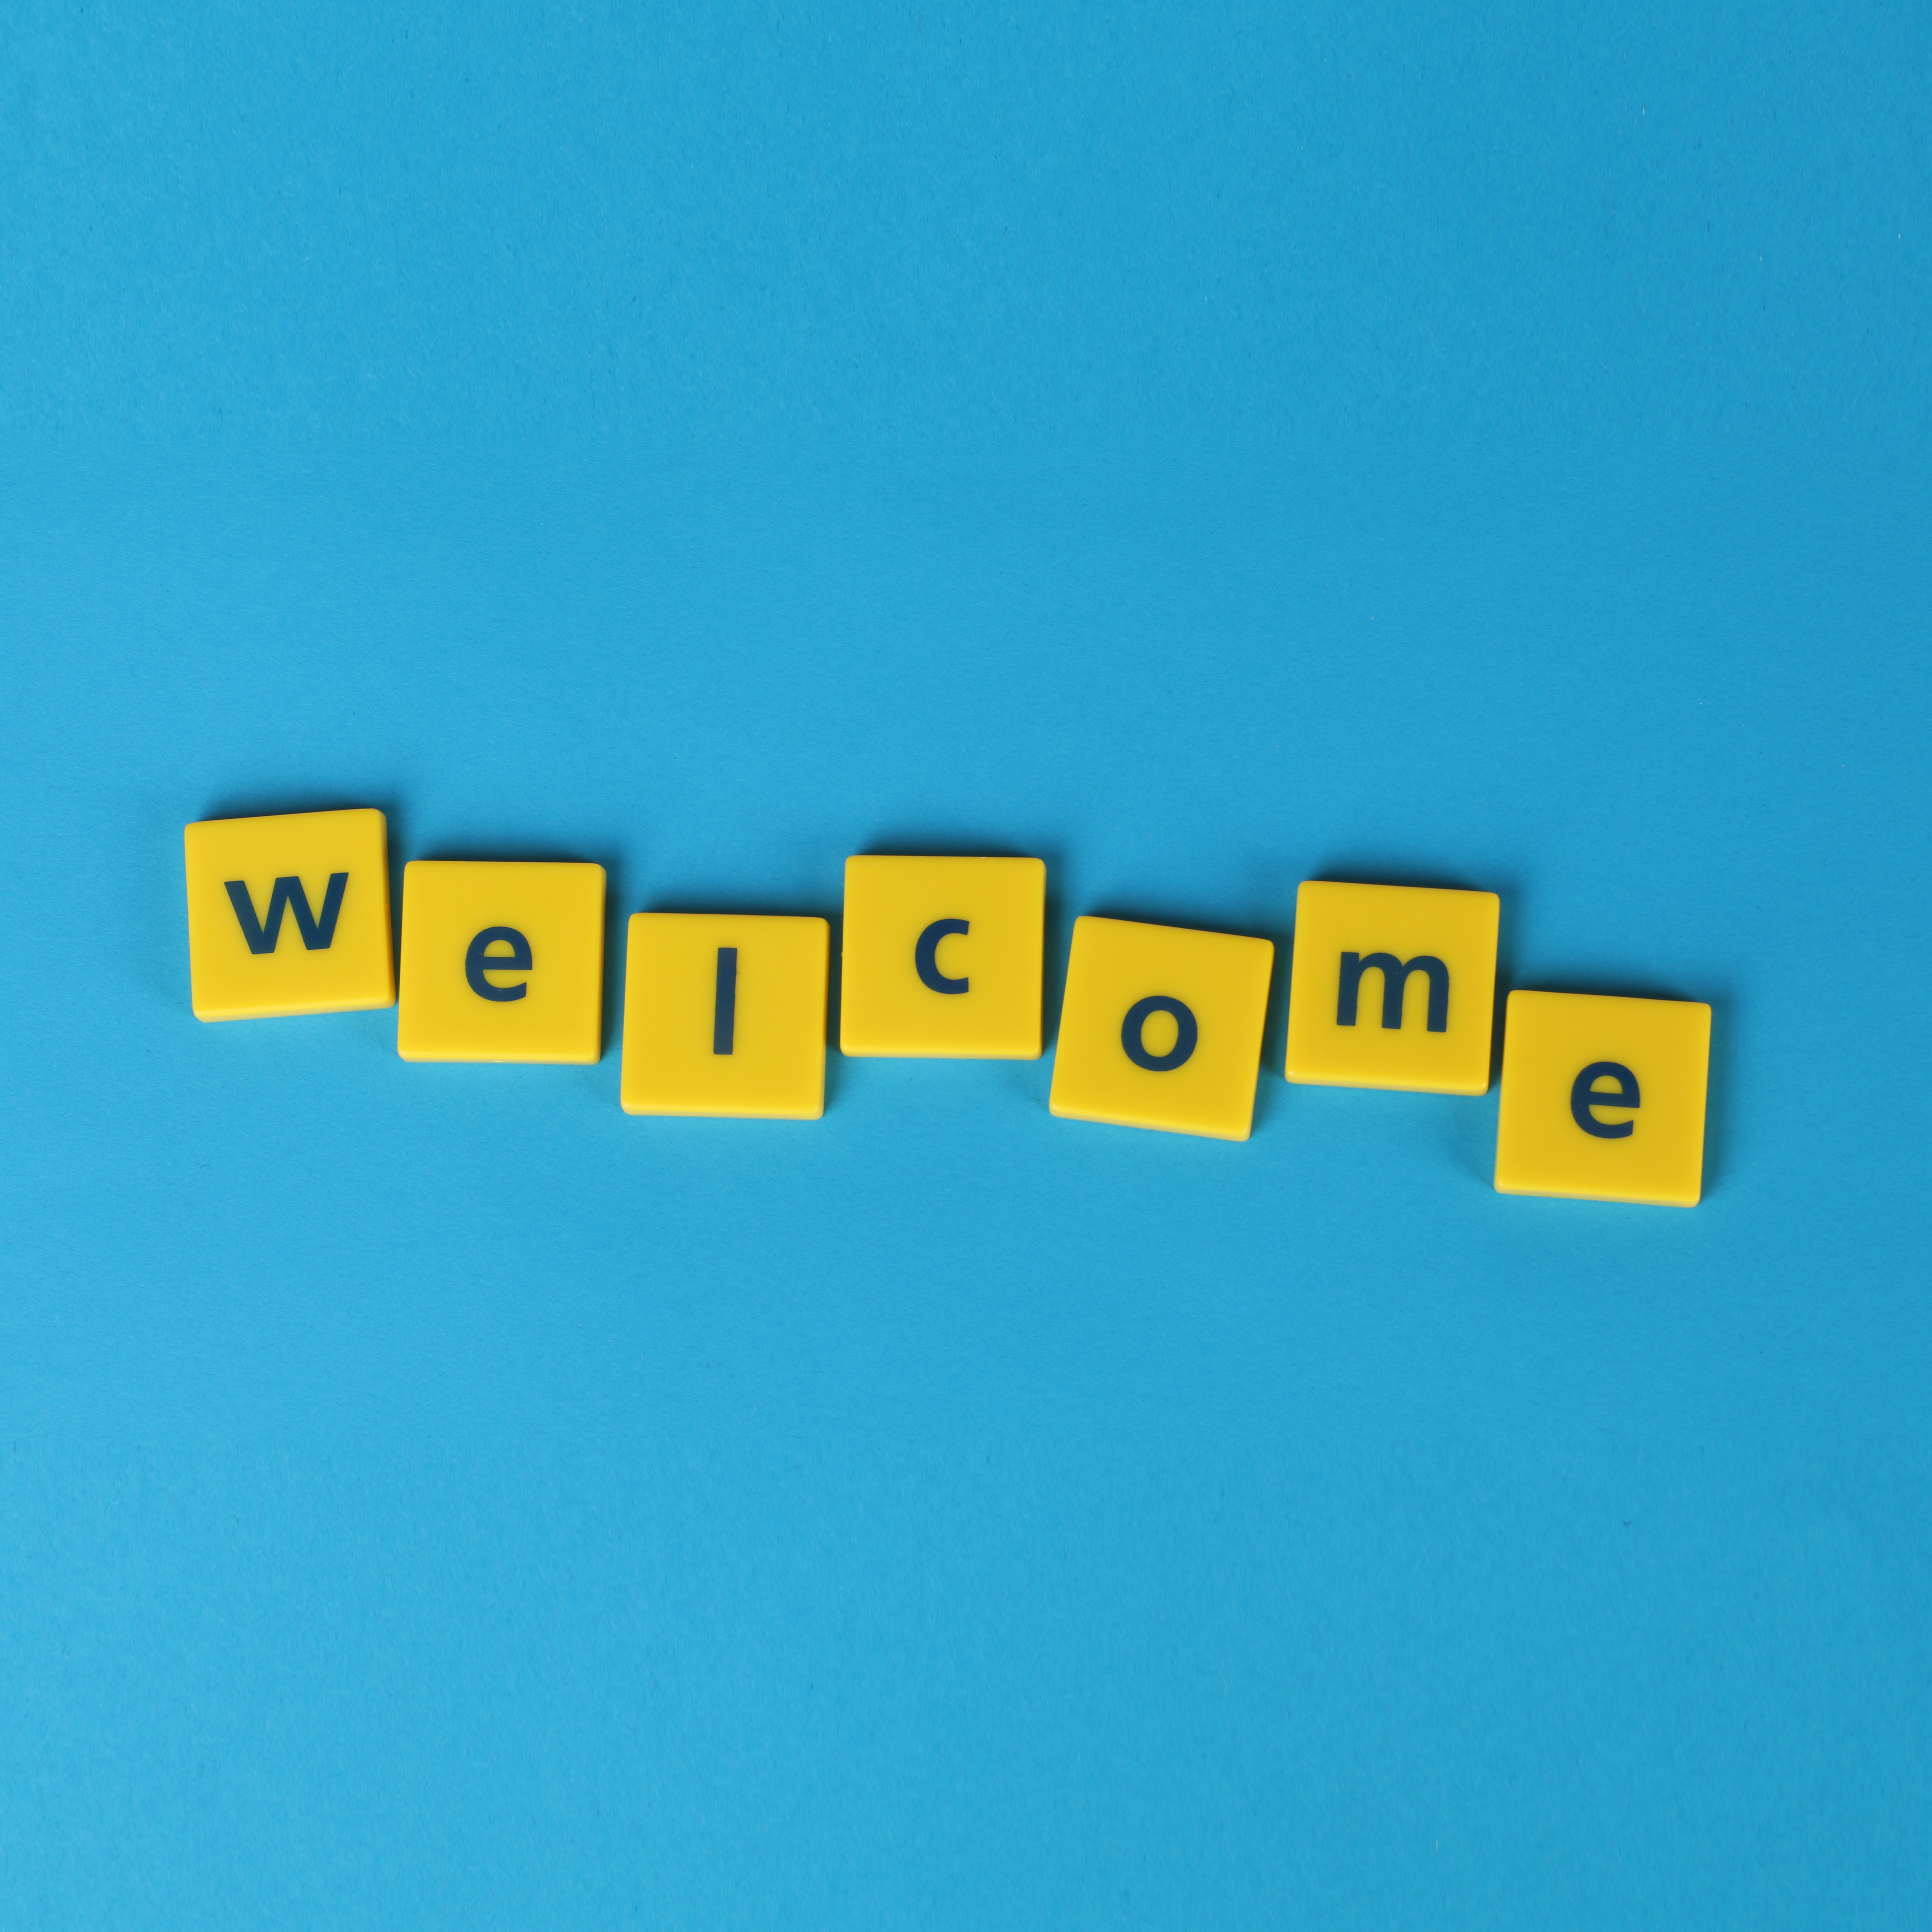 Yellow tiles on blue background that spell “welcome”